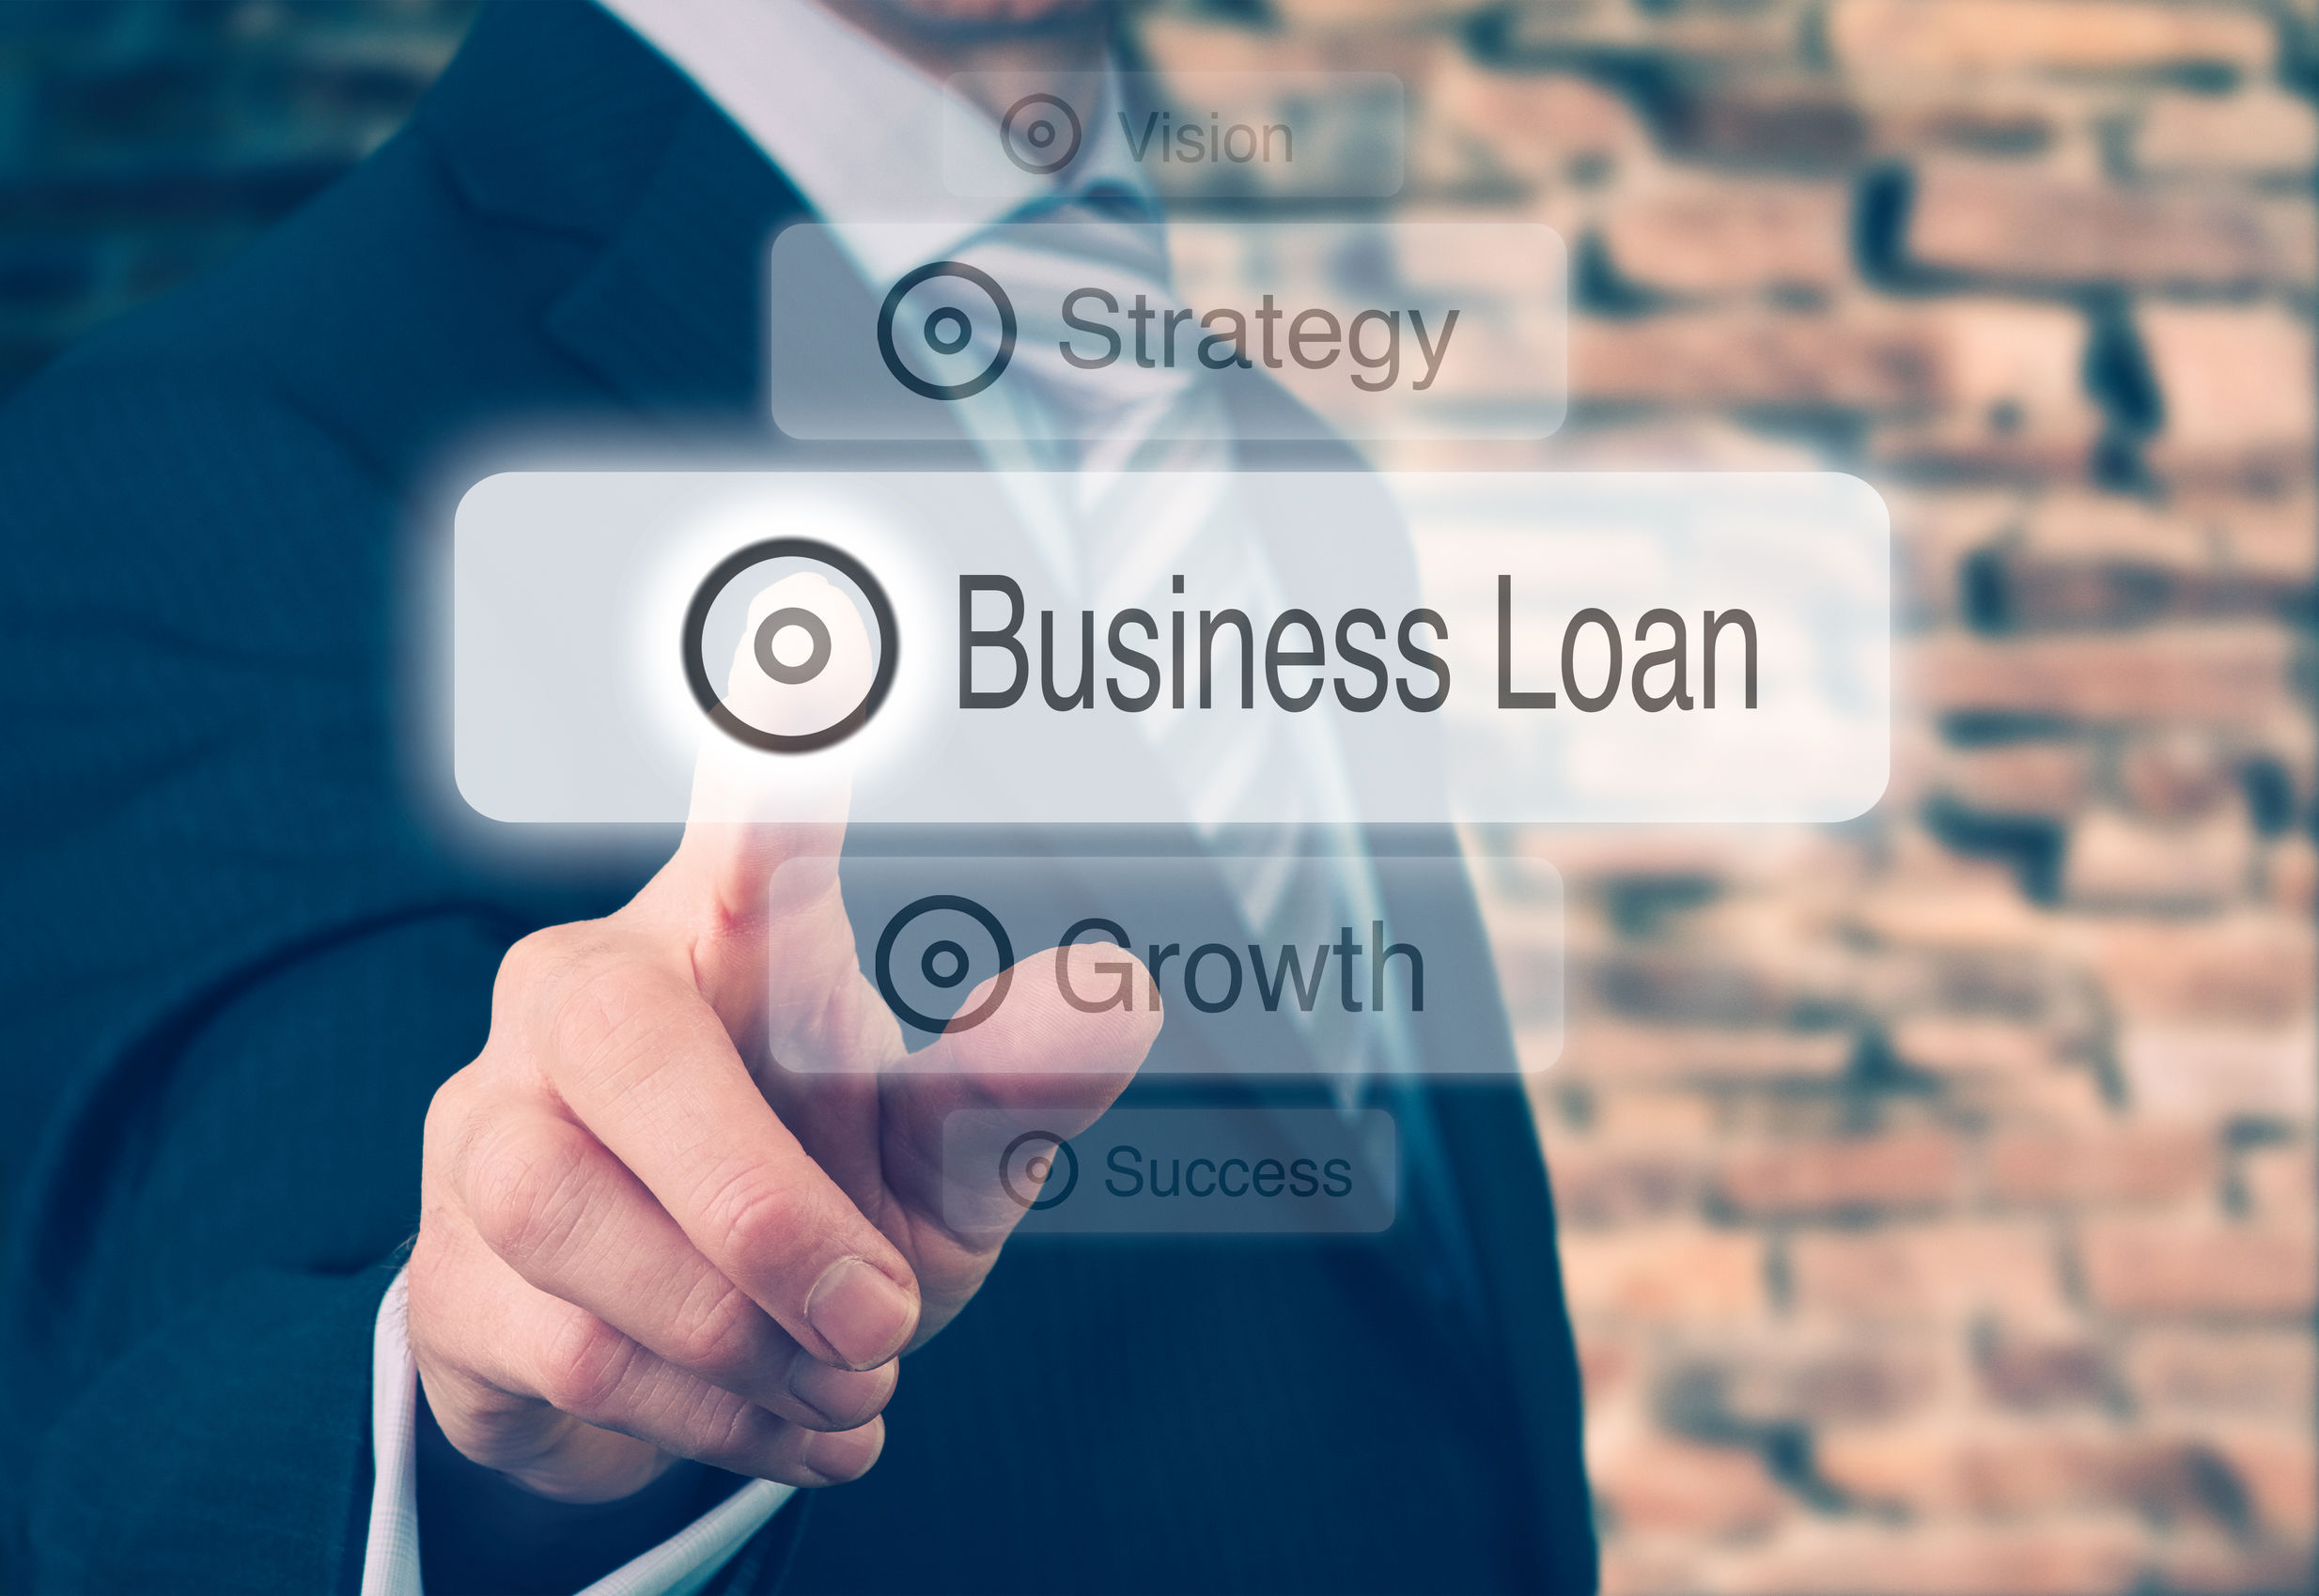 Pushing the button on Business Loan to find a New Lender